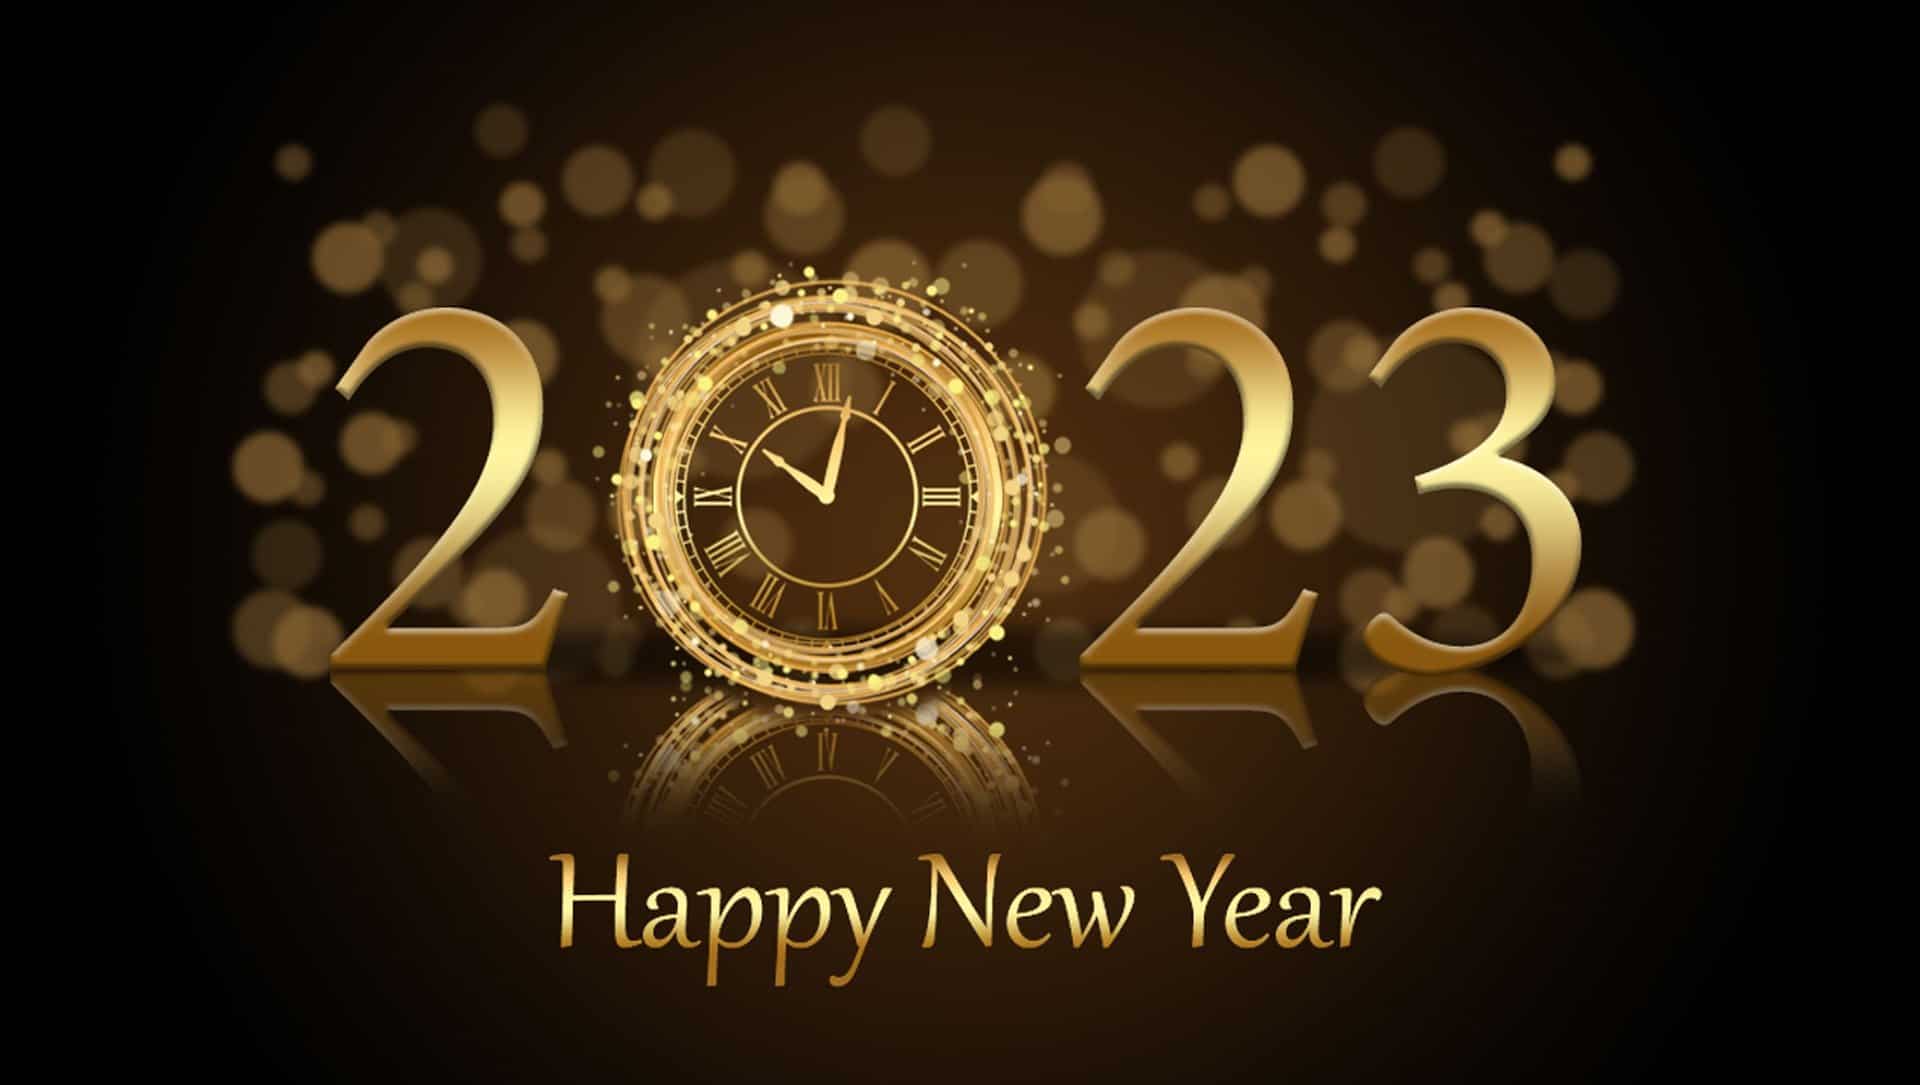 Happy New Year 2023 Wishes Images Status Cards Greeting Download